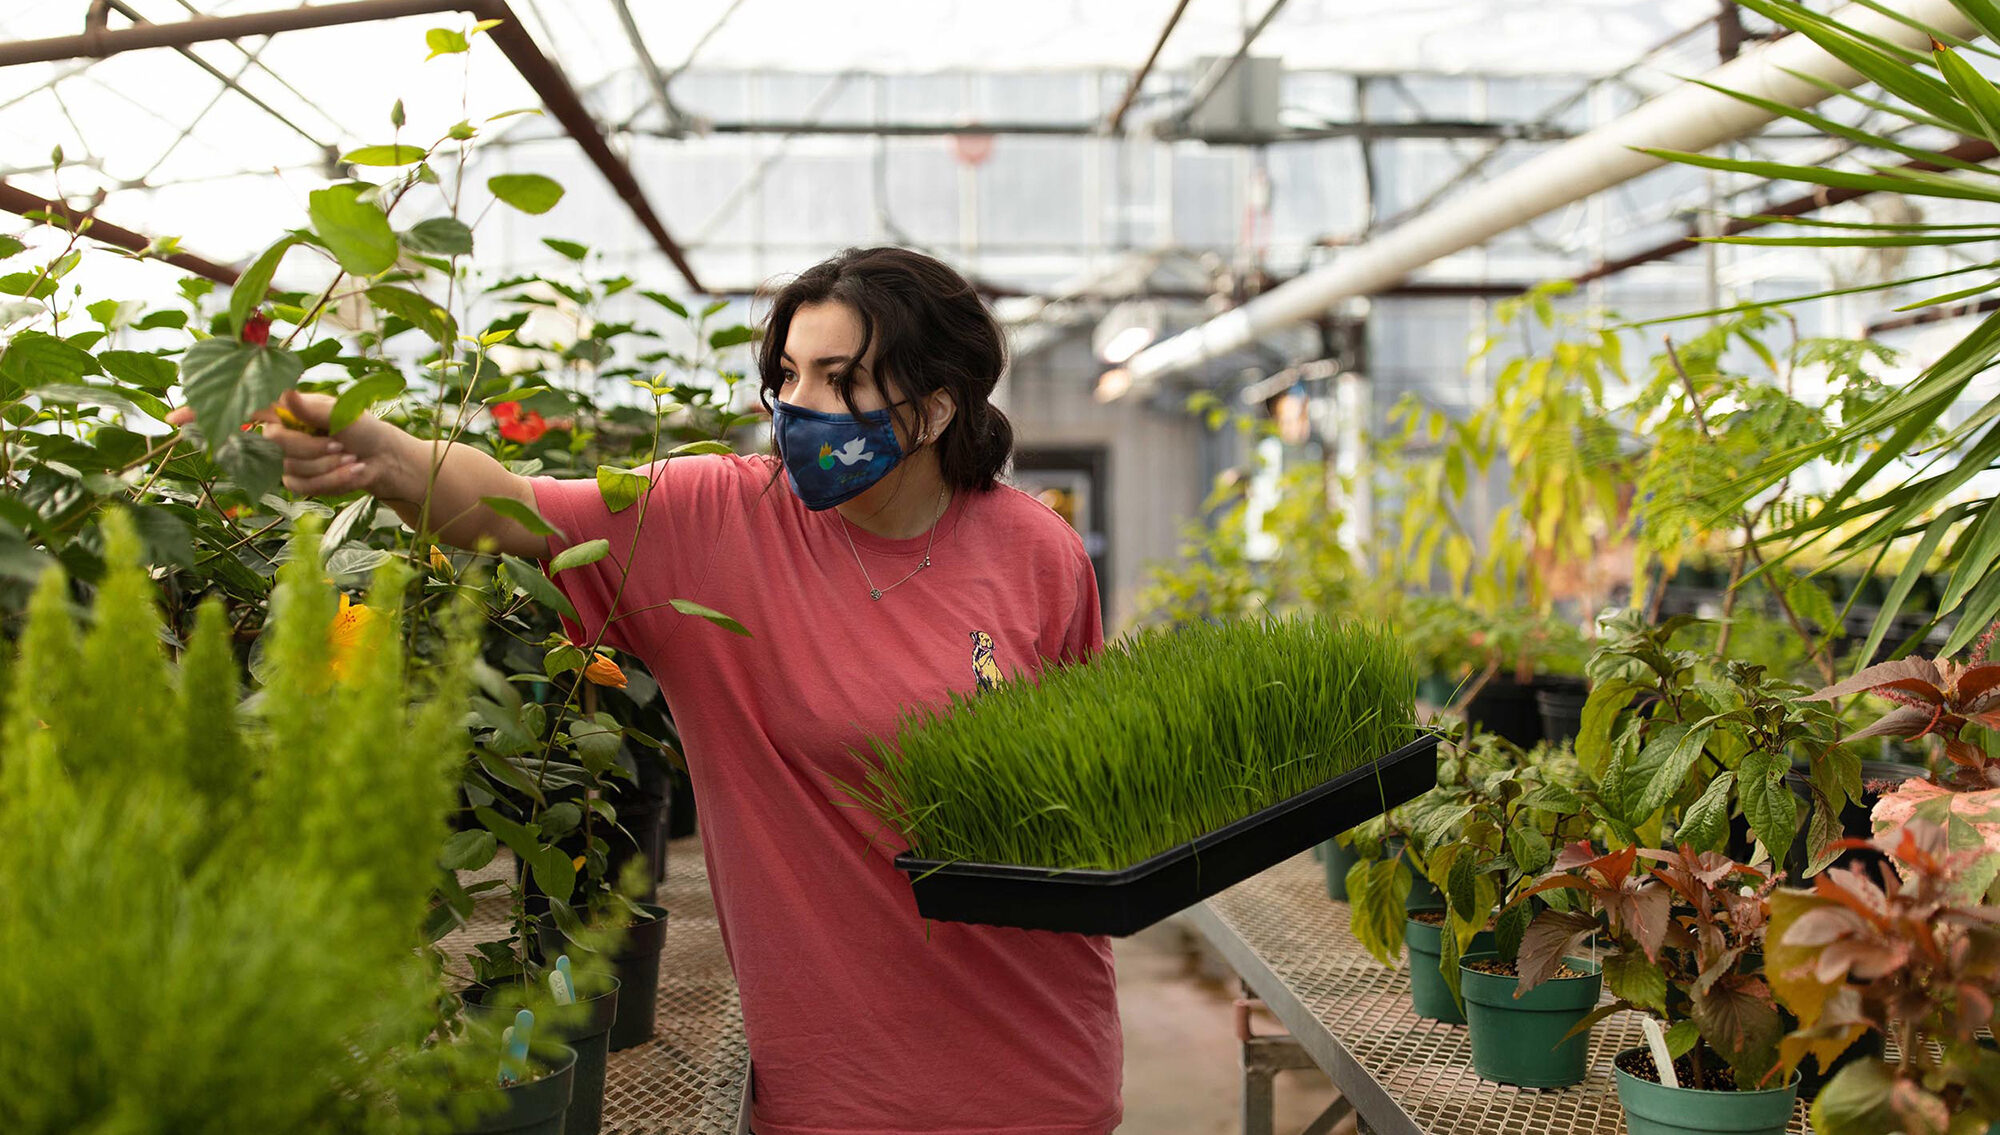 Kamola Khaitova in shorts, T-shirt and a mask, carrying a container of wheatgrass, rows of potted plants on either side